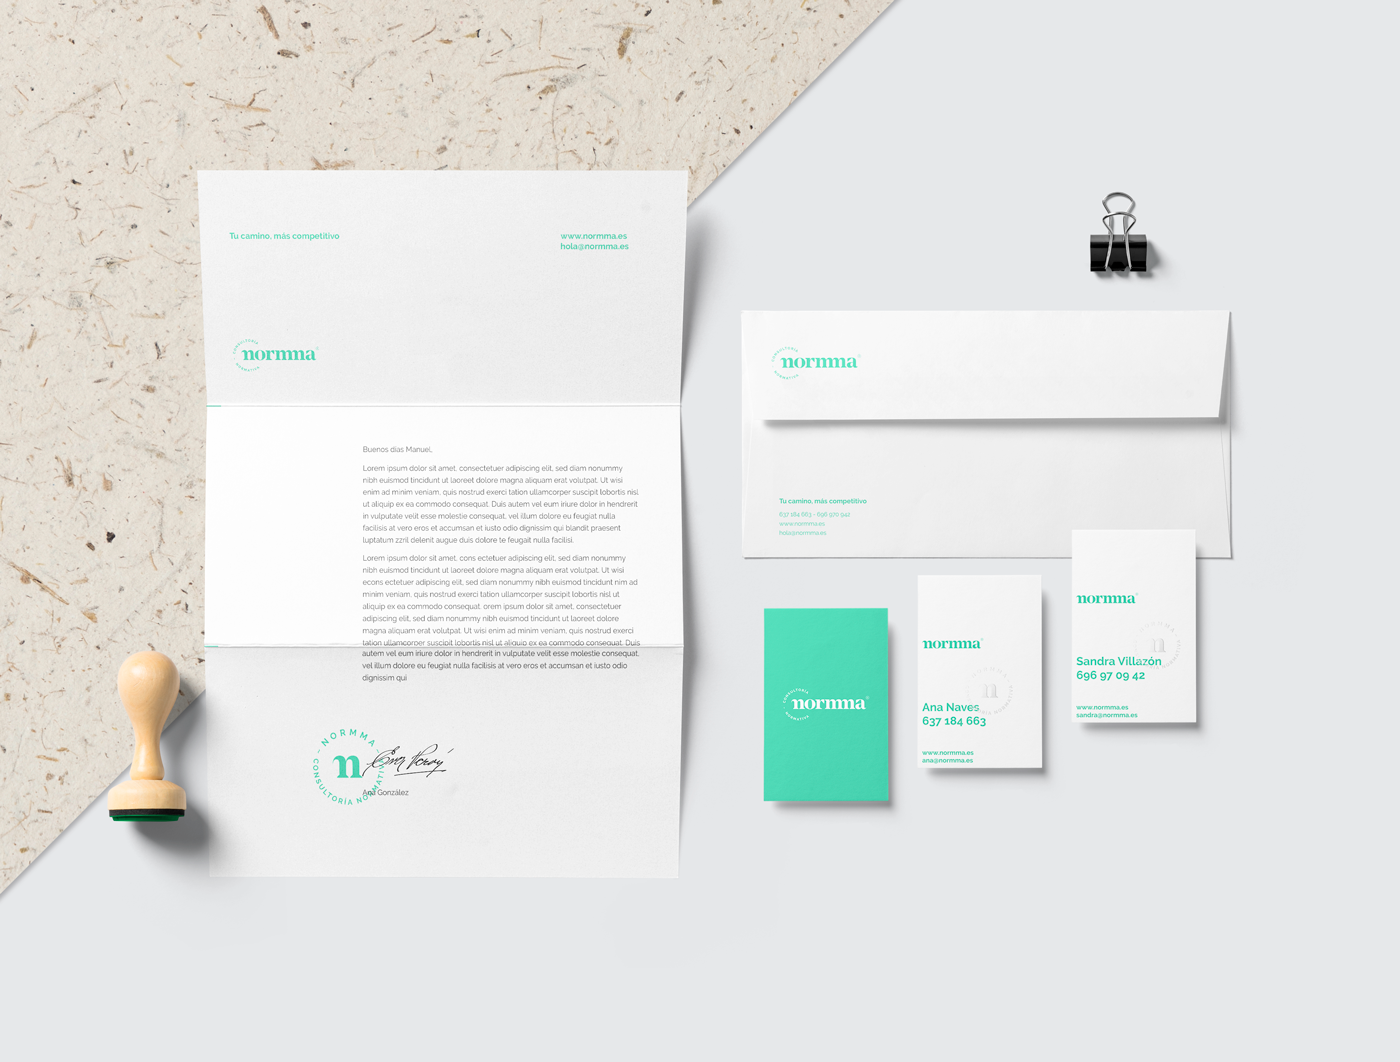 normativa Verde green Office consultancy consultants Normative regulations Stationery clean